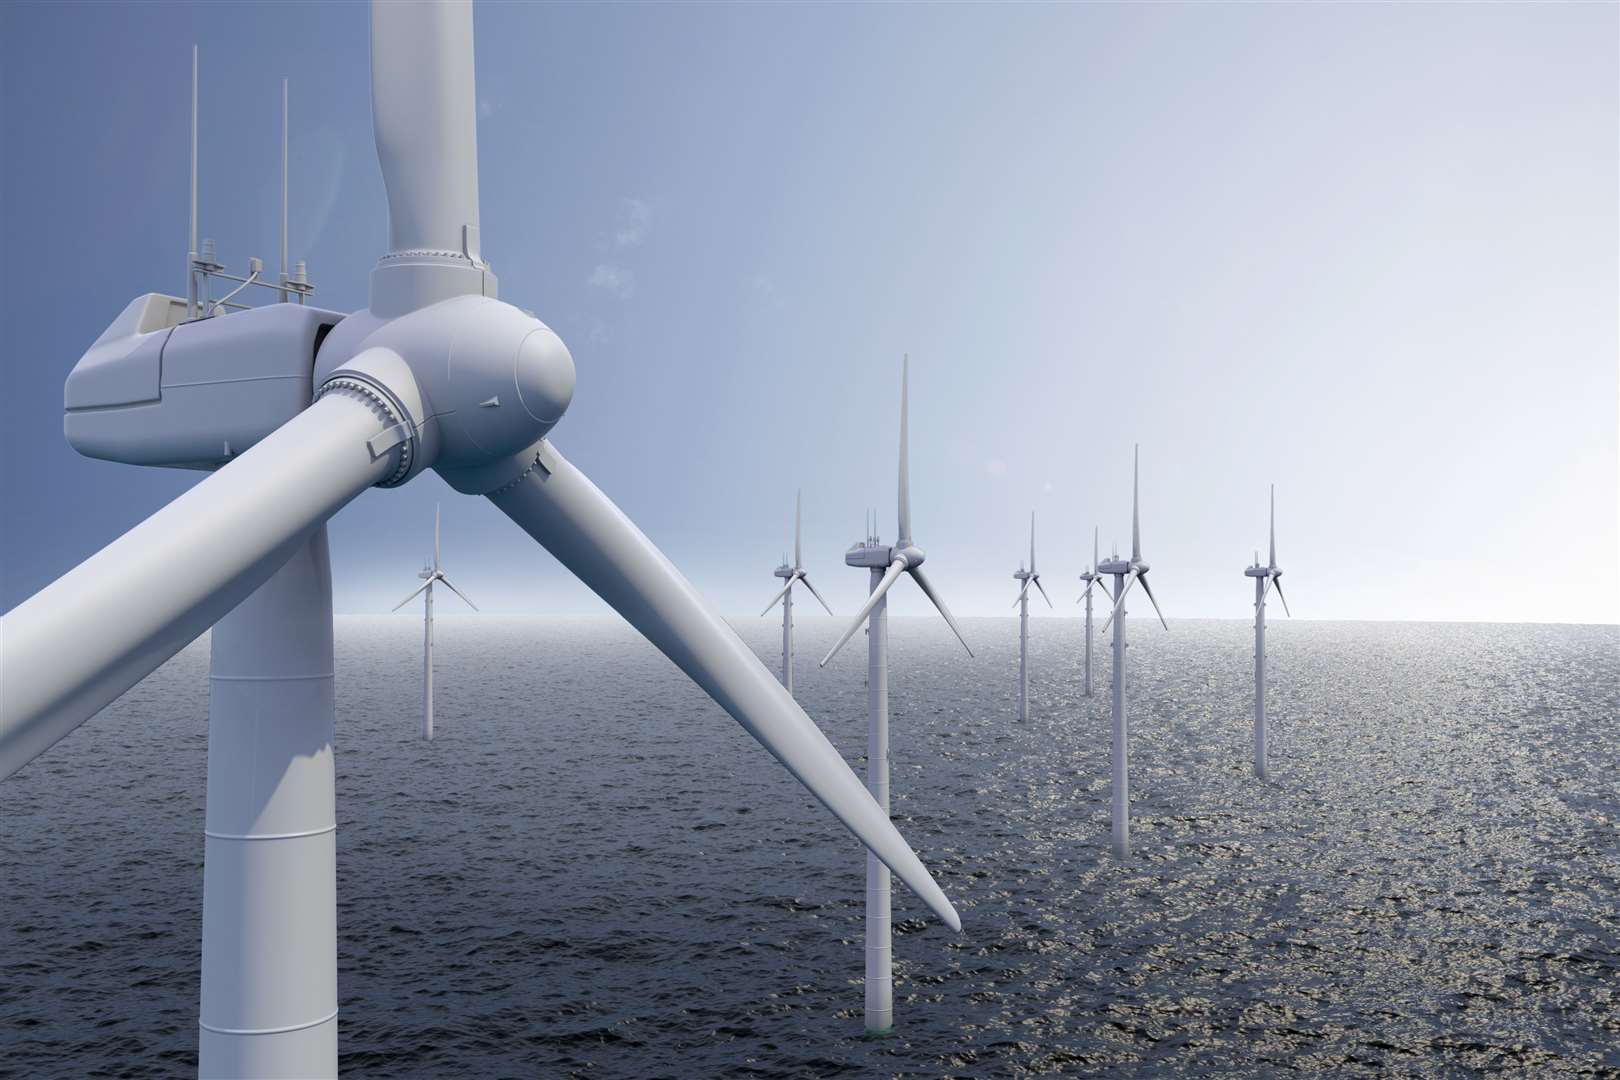 The ScotWind leasing round is the first round of offshore wind leasing in Scottish waters for a decade.